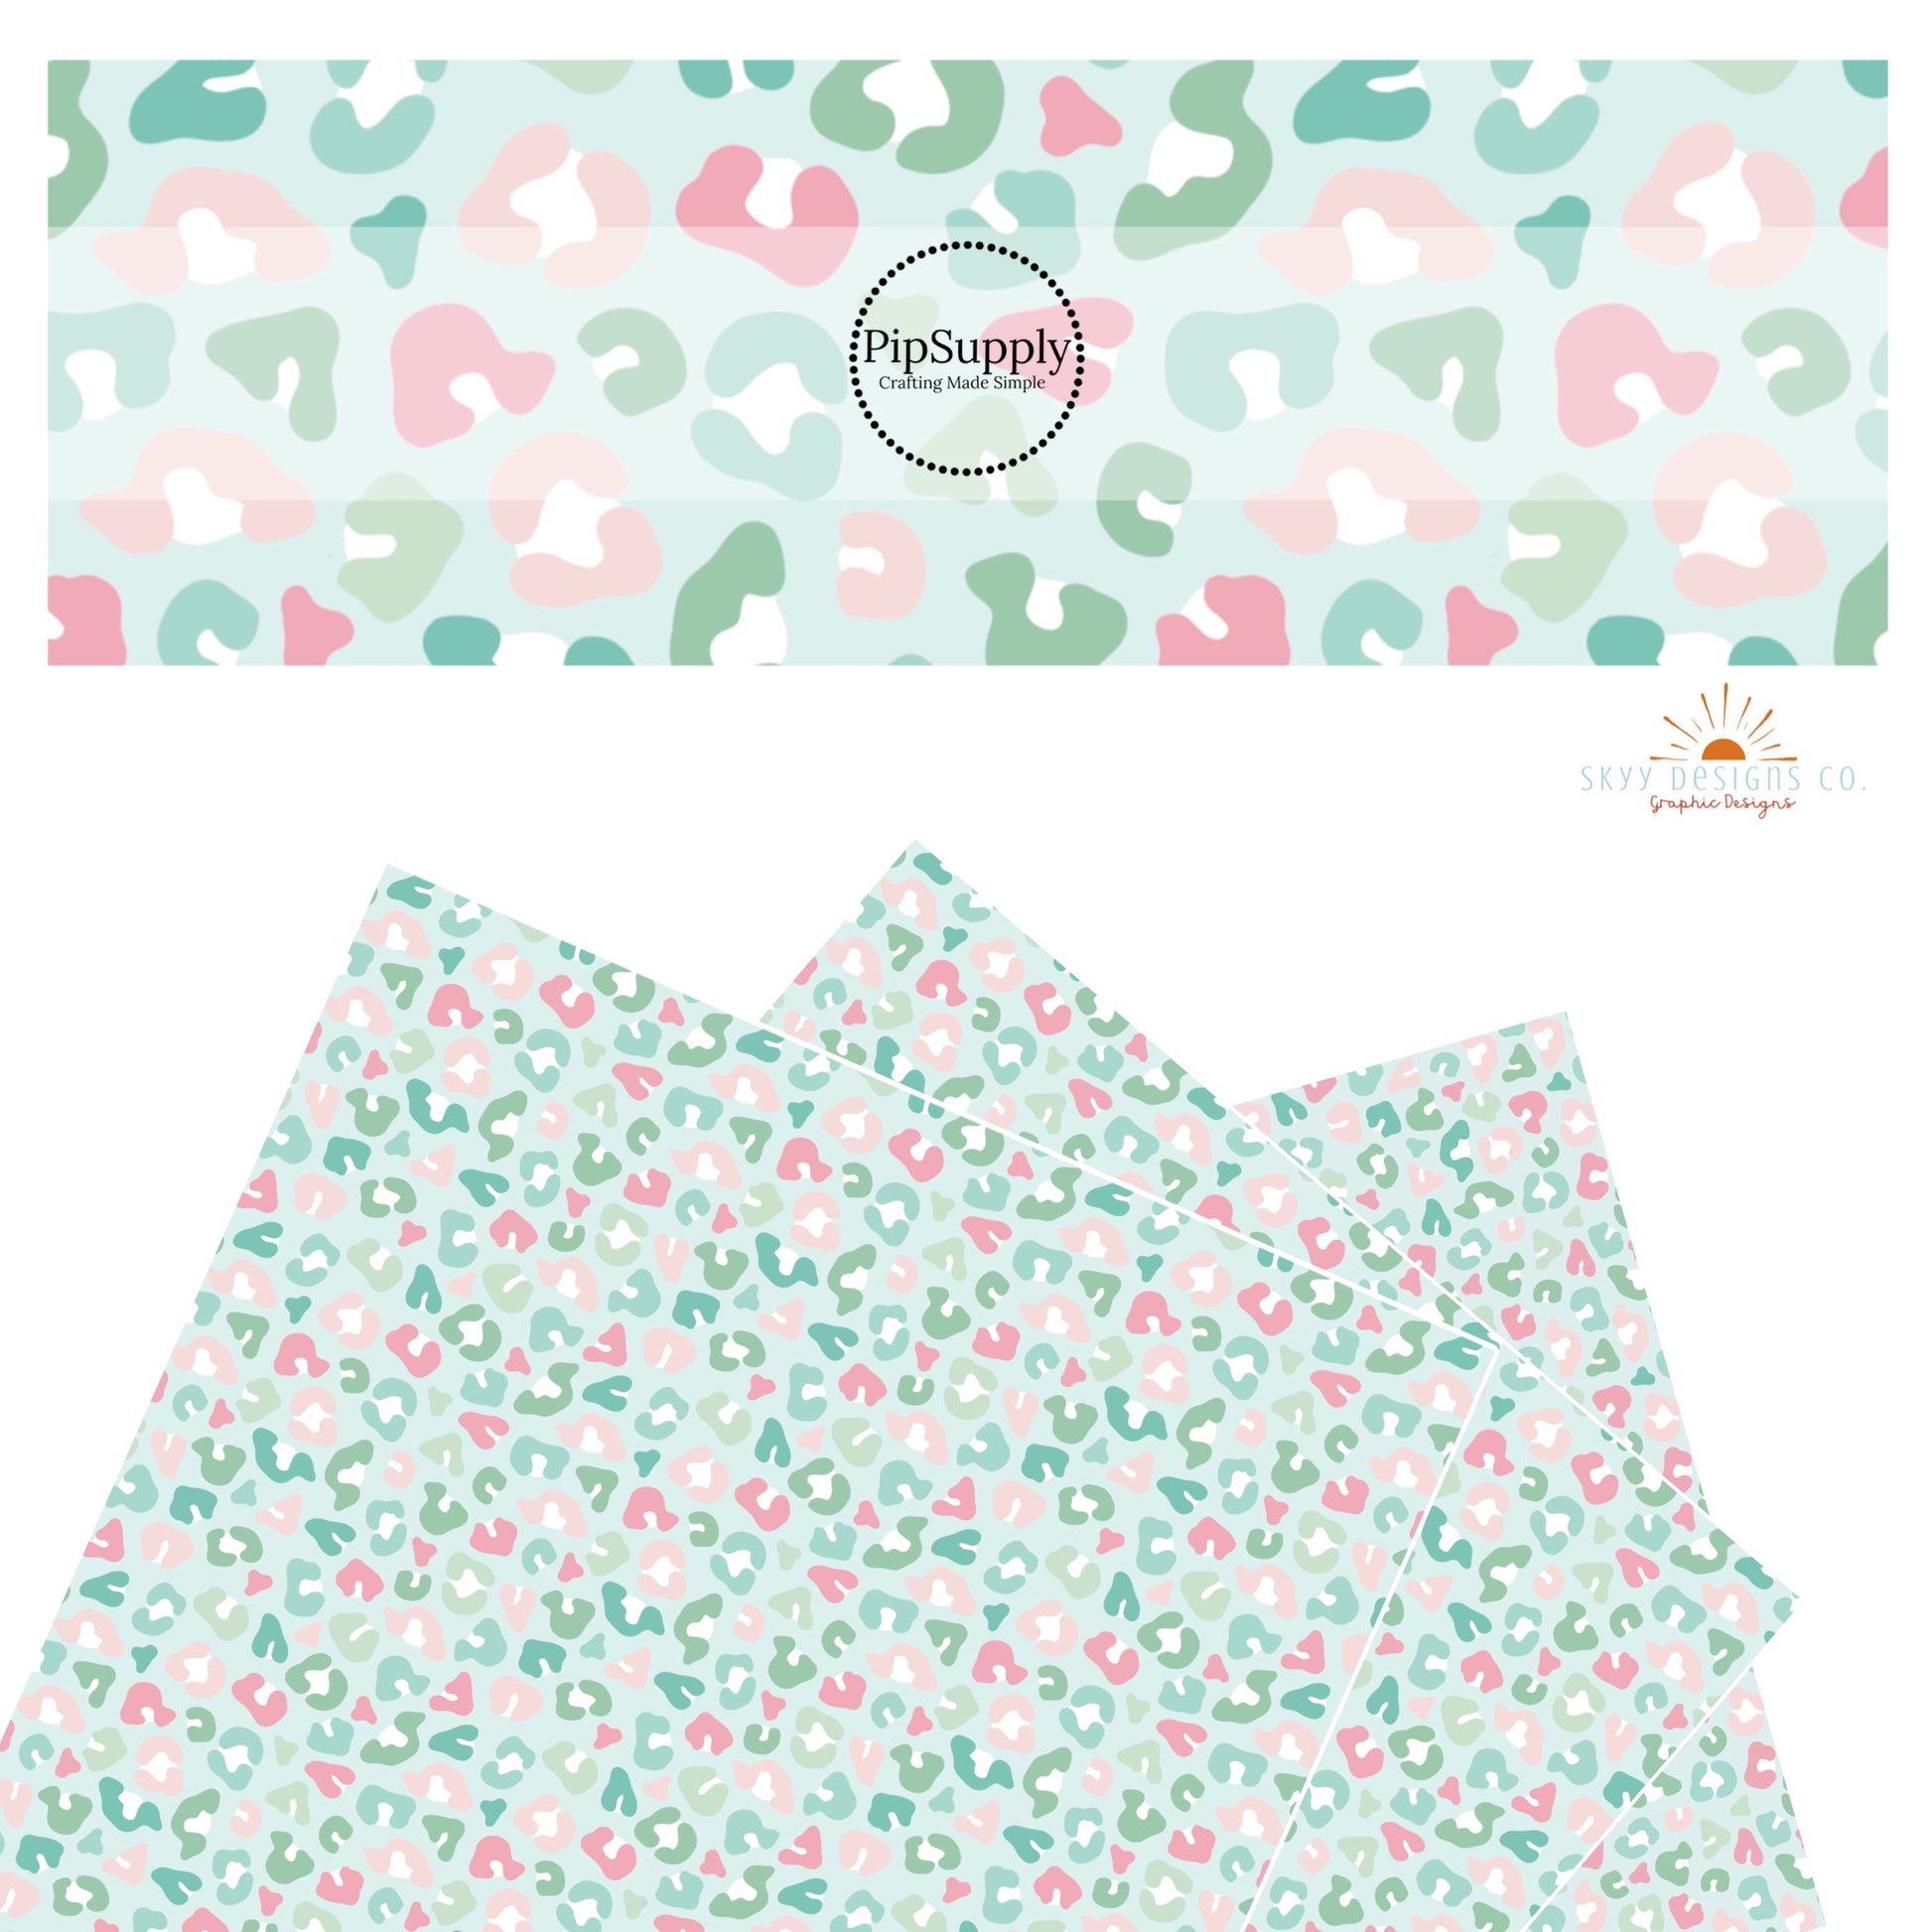 Pink, mint, and green leopard spots on mint faux leather sheets